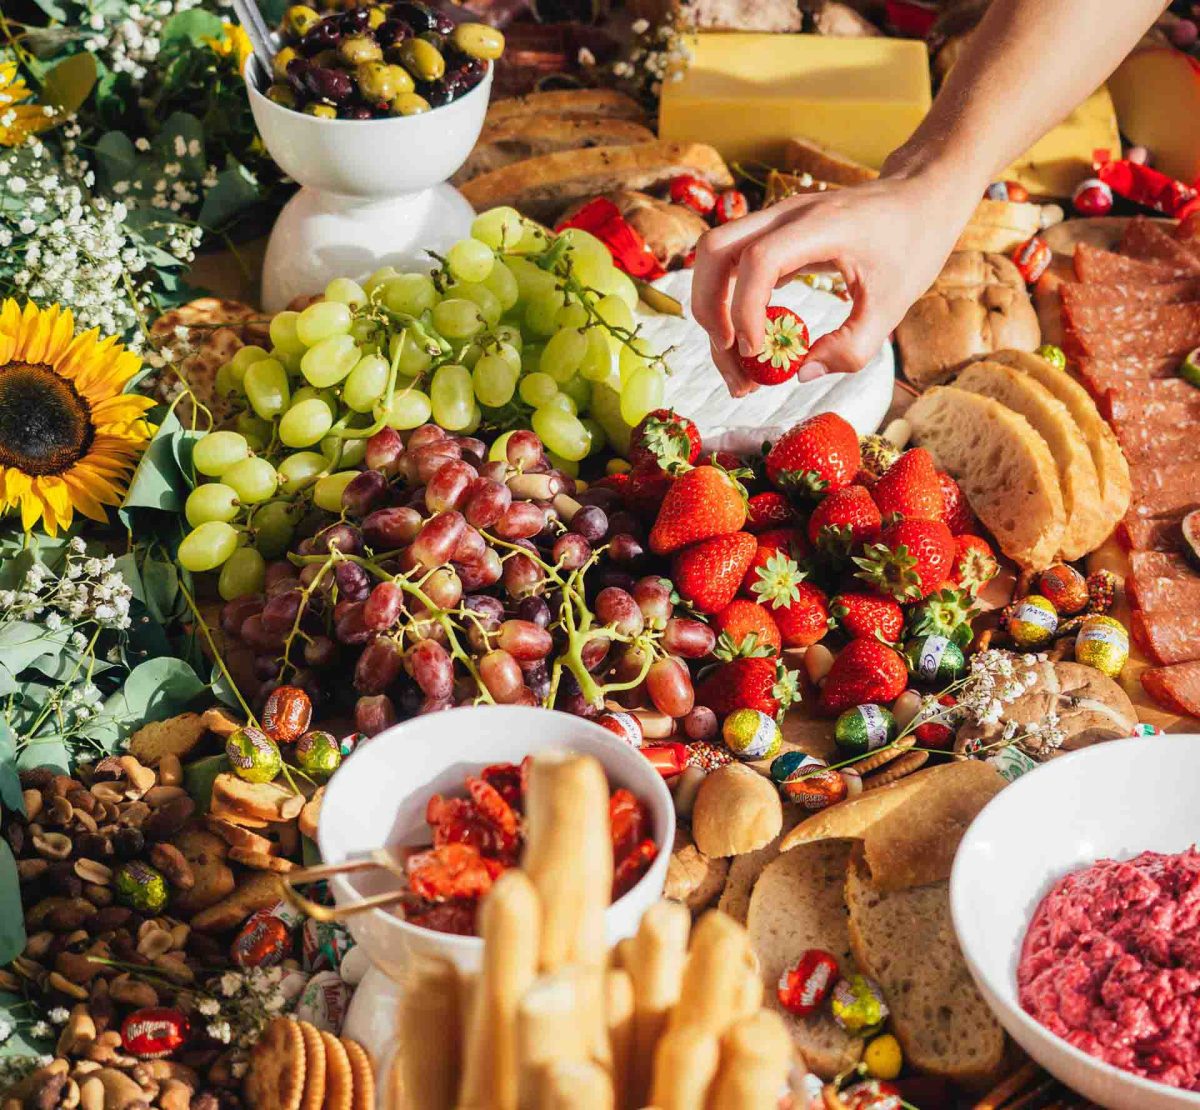 A table full of food with grapes, crackers and other snacks.